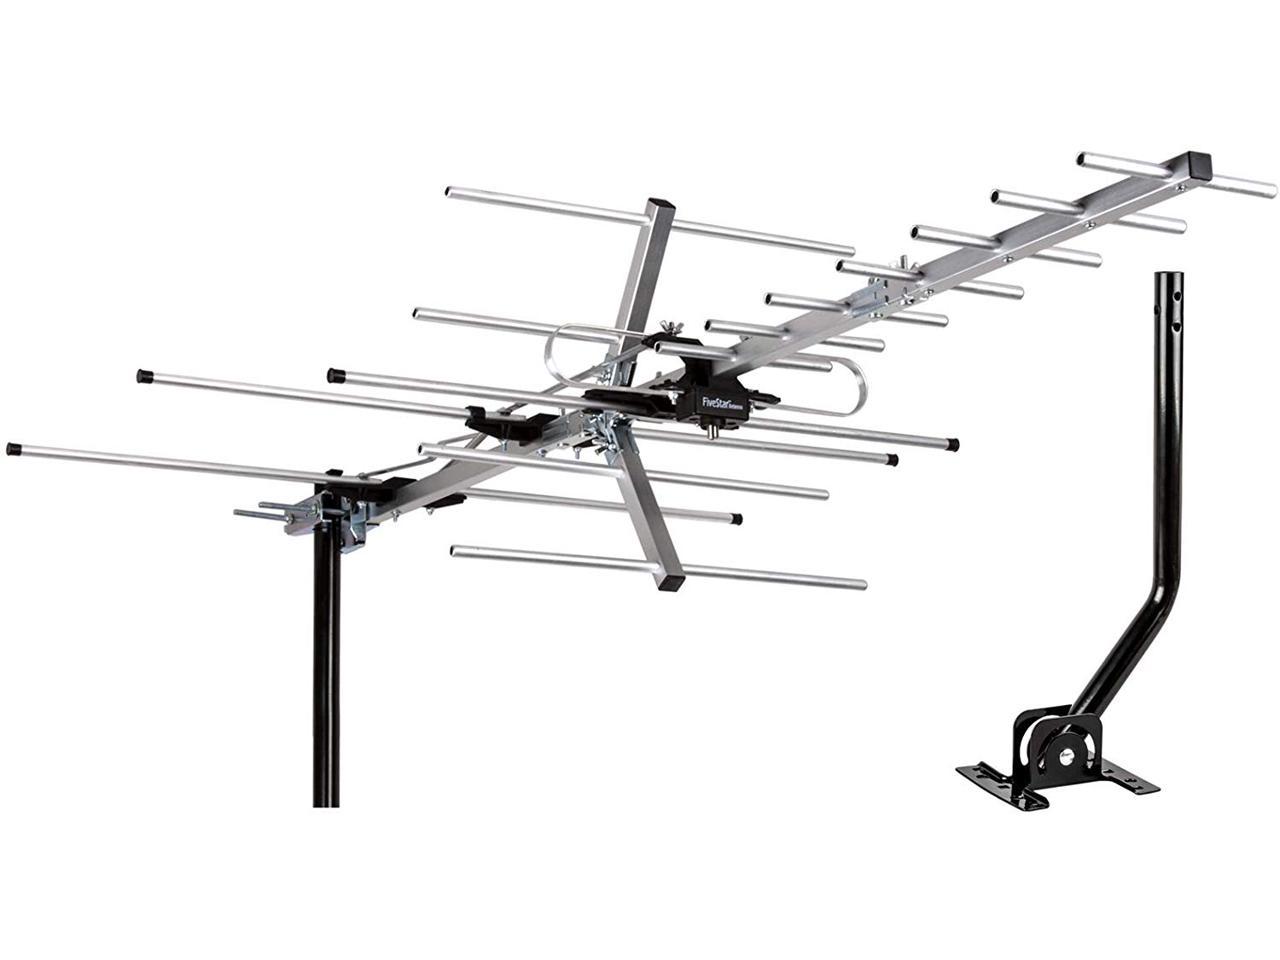 Newest 2020 Five Star Tv Antenna Indoor Outdoor Yagi Satellite Hd With Up To 200 Mile Range Attic Or Roof Mount Long Digital Ota For 4k 1080p